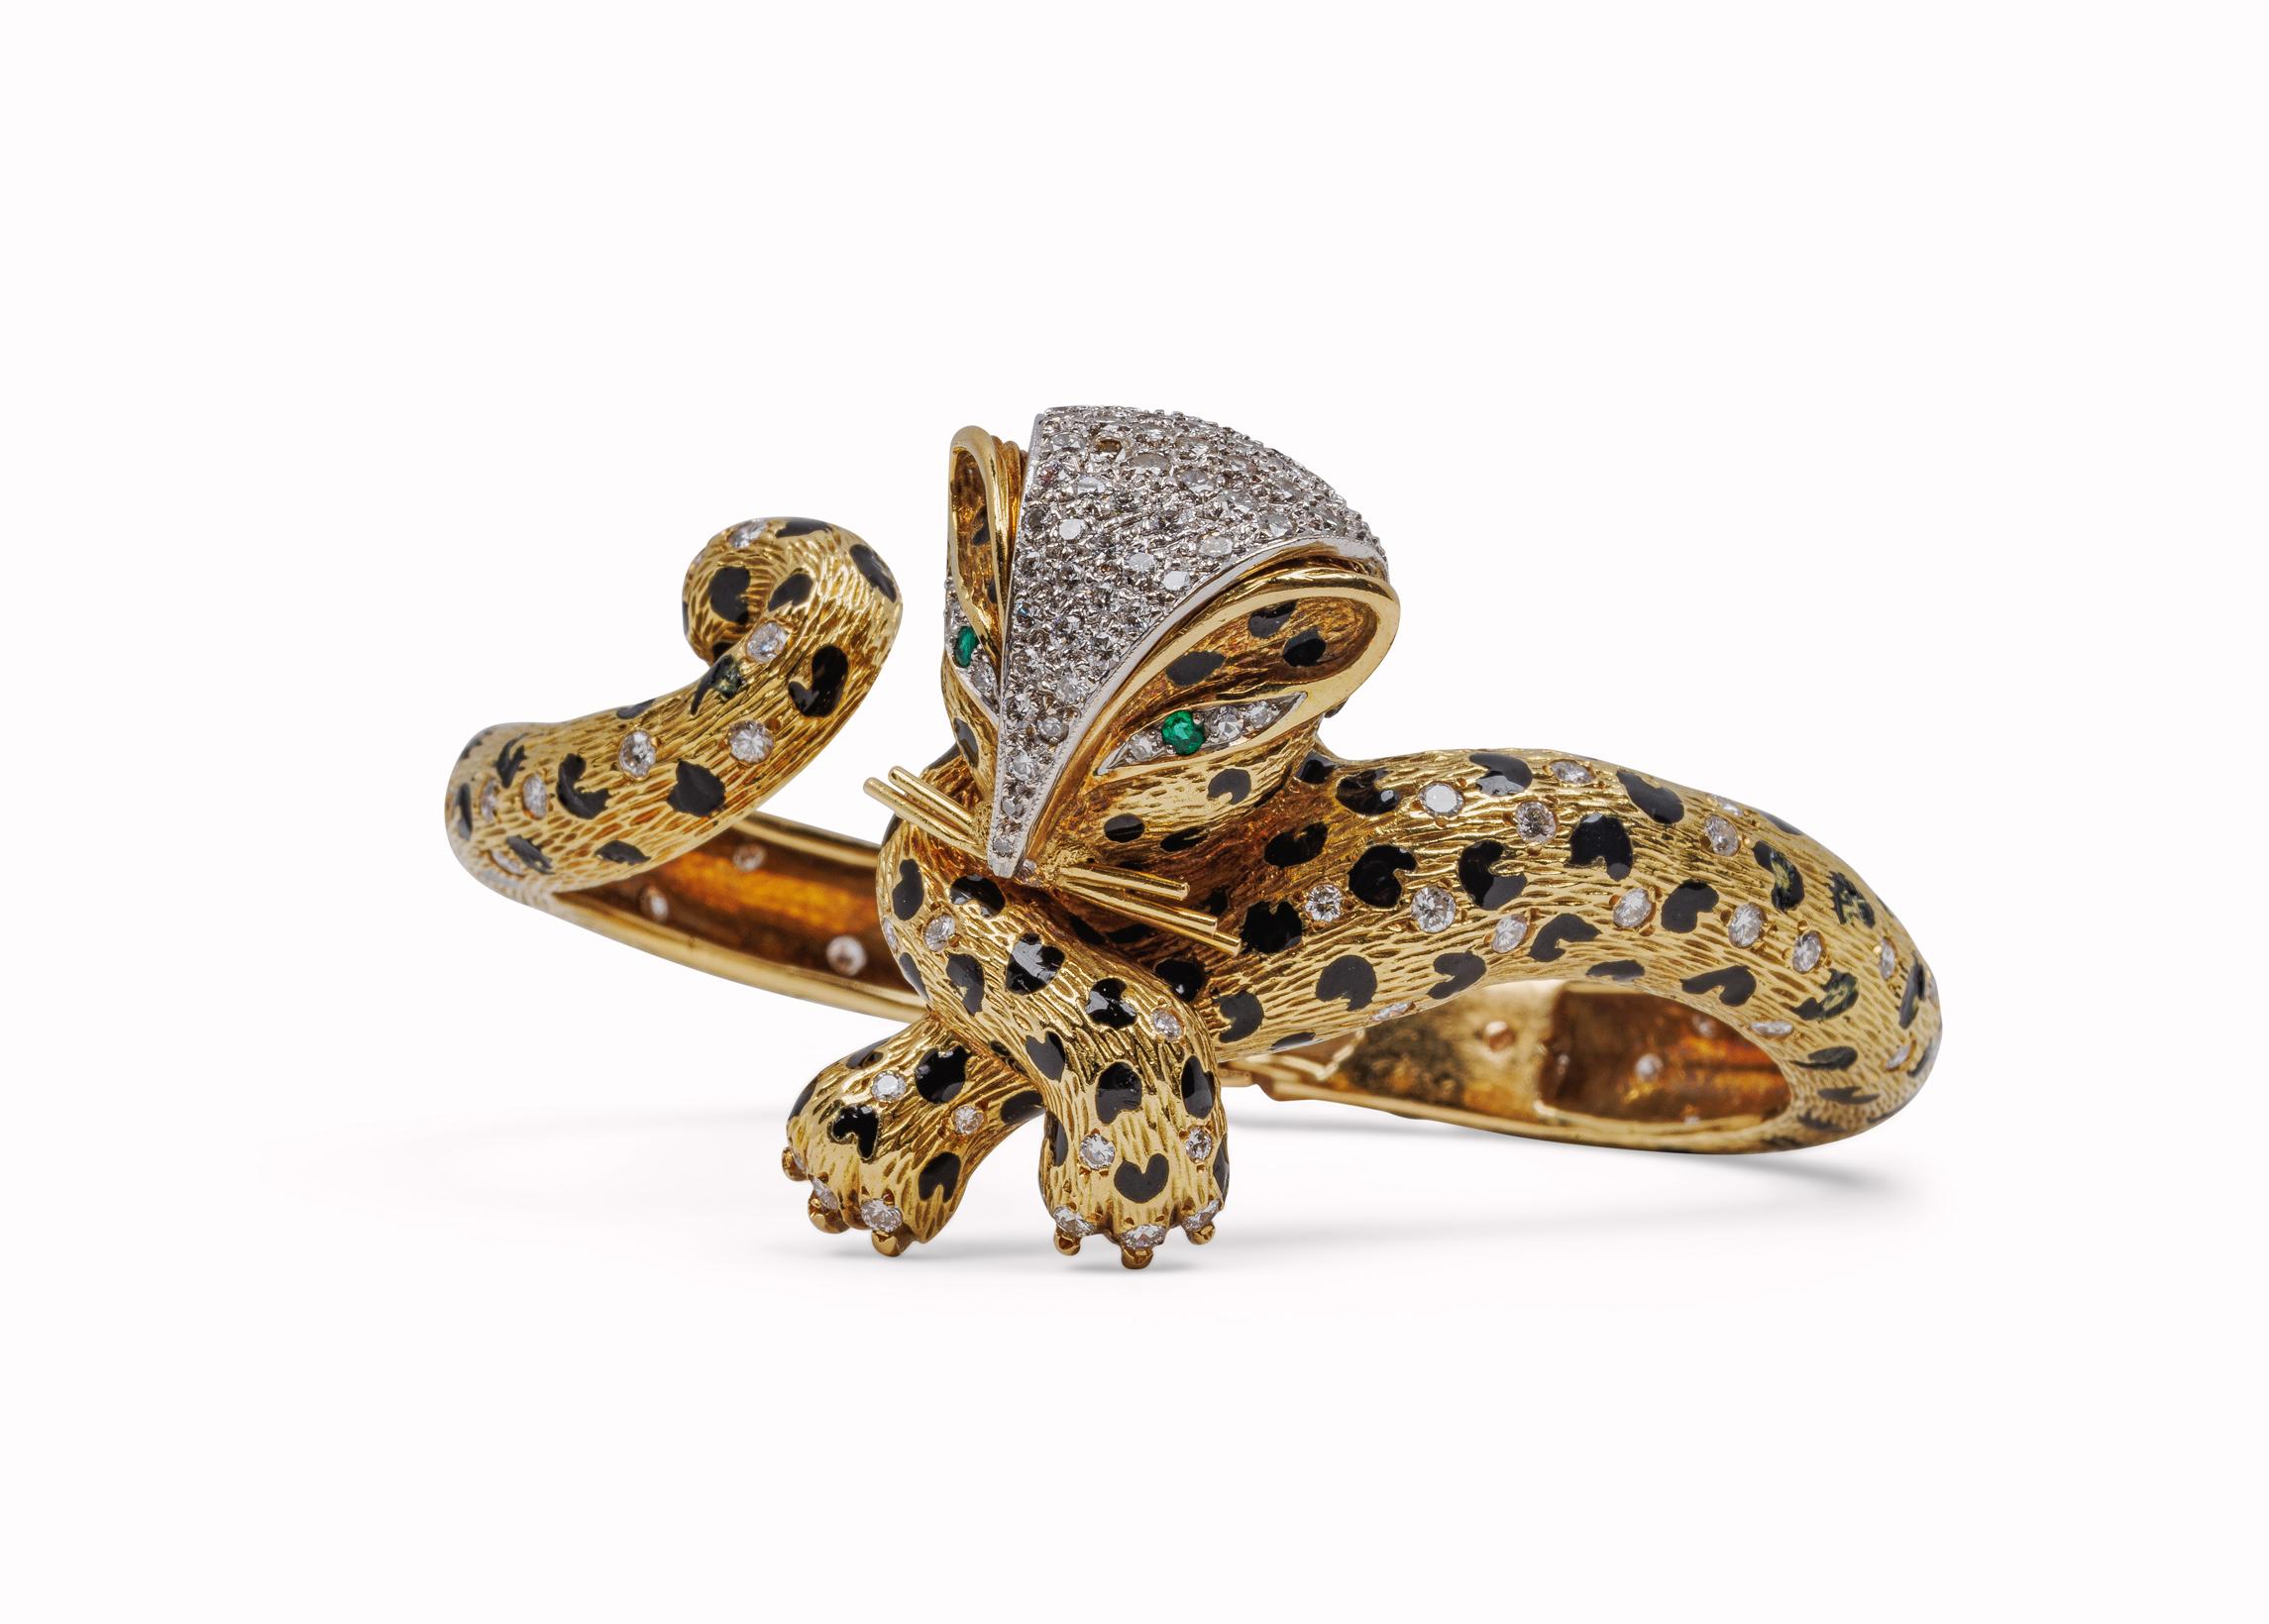 Vintage Fred Paris Leopard Bangle in 18k Yellow Gold with Emeralds and Diamonds

143 round diamonds 5.14 cts diamonds  